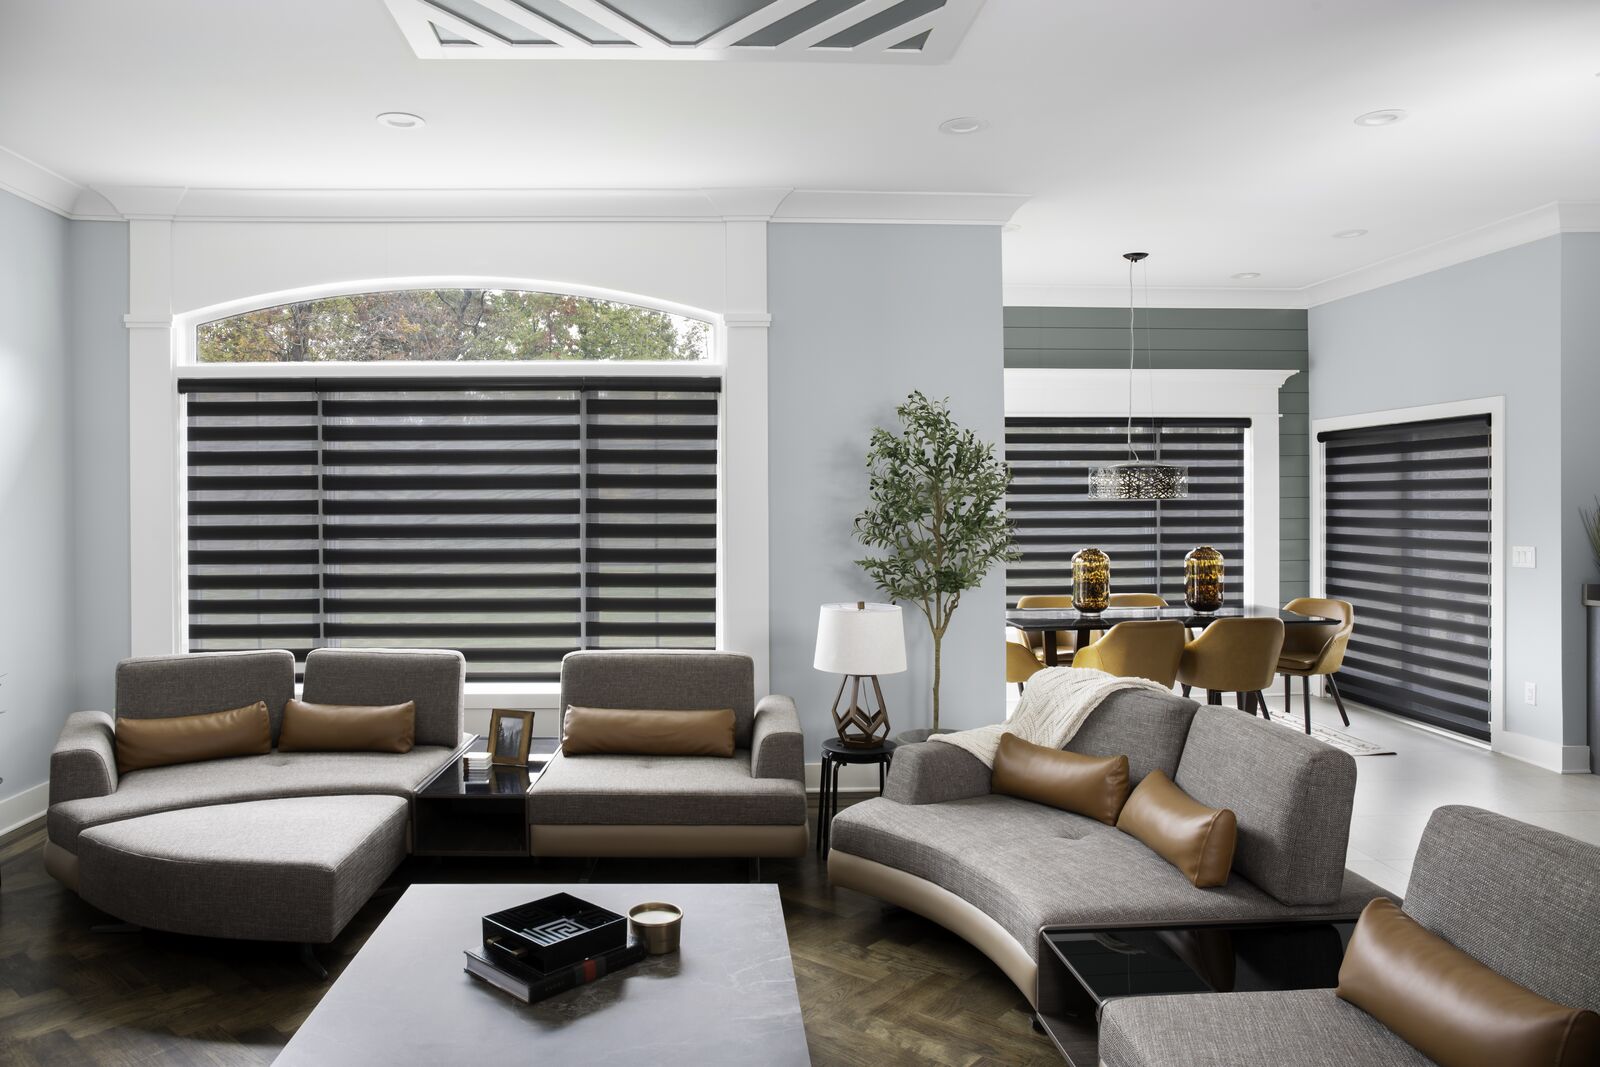 Large windows in a modern living room are covered with Cascade sheer shades with bold dark horizontal stripes